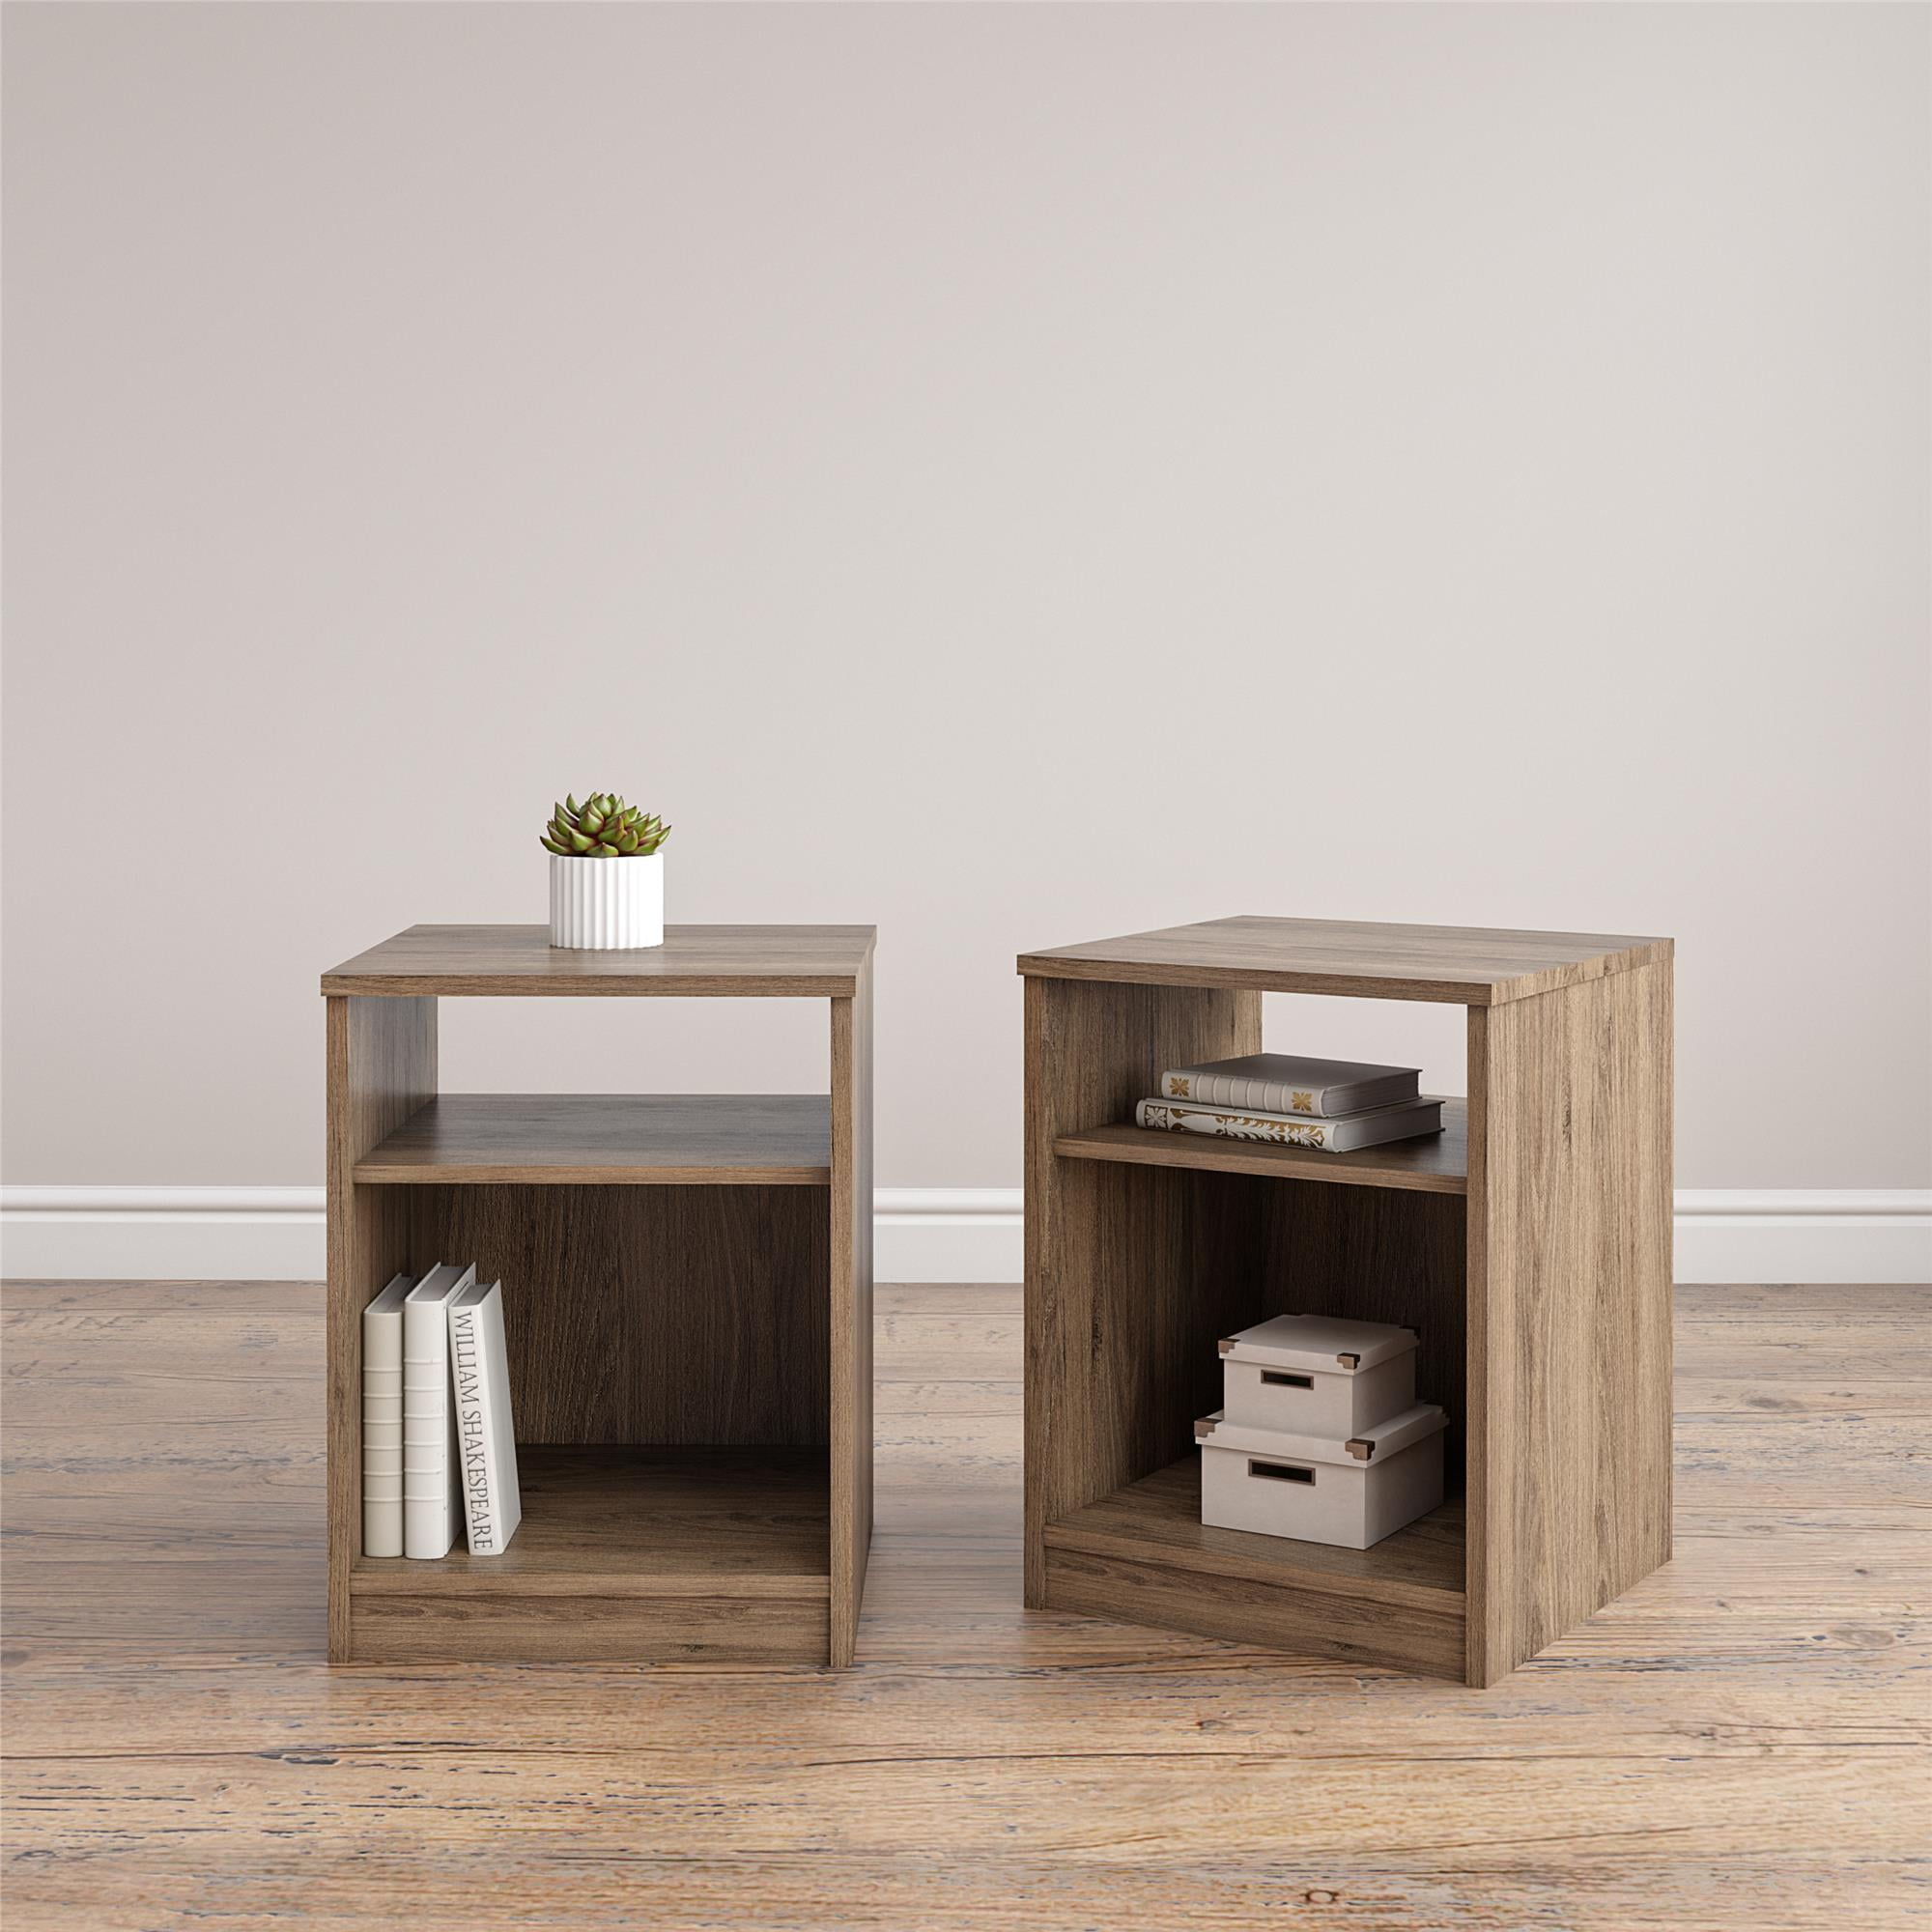 Details about   Classic Open Shelf Nightstand Bedroom Bedside Table Large Lower Cubby Rustic Oak 